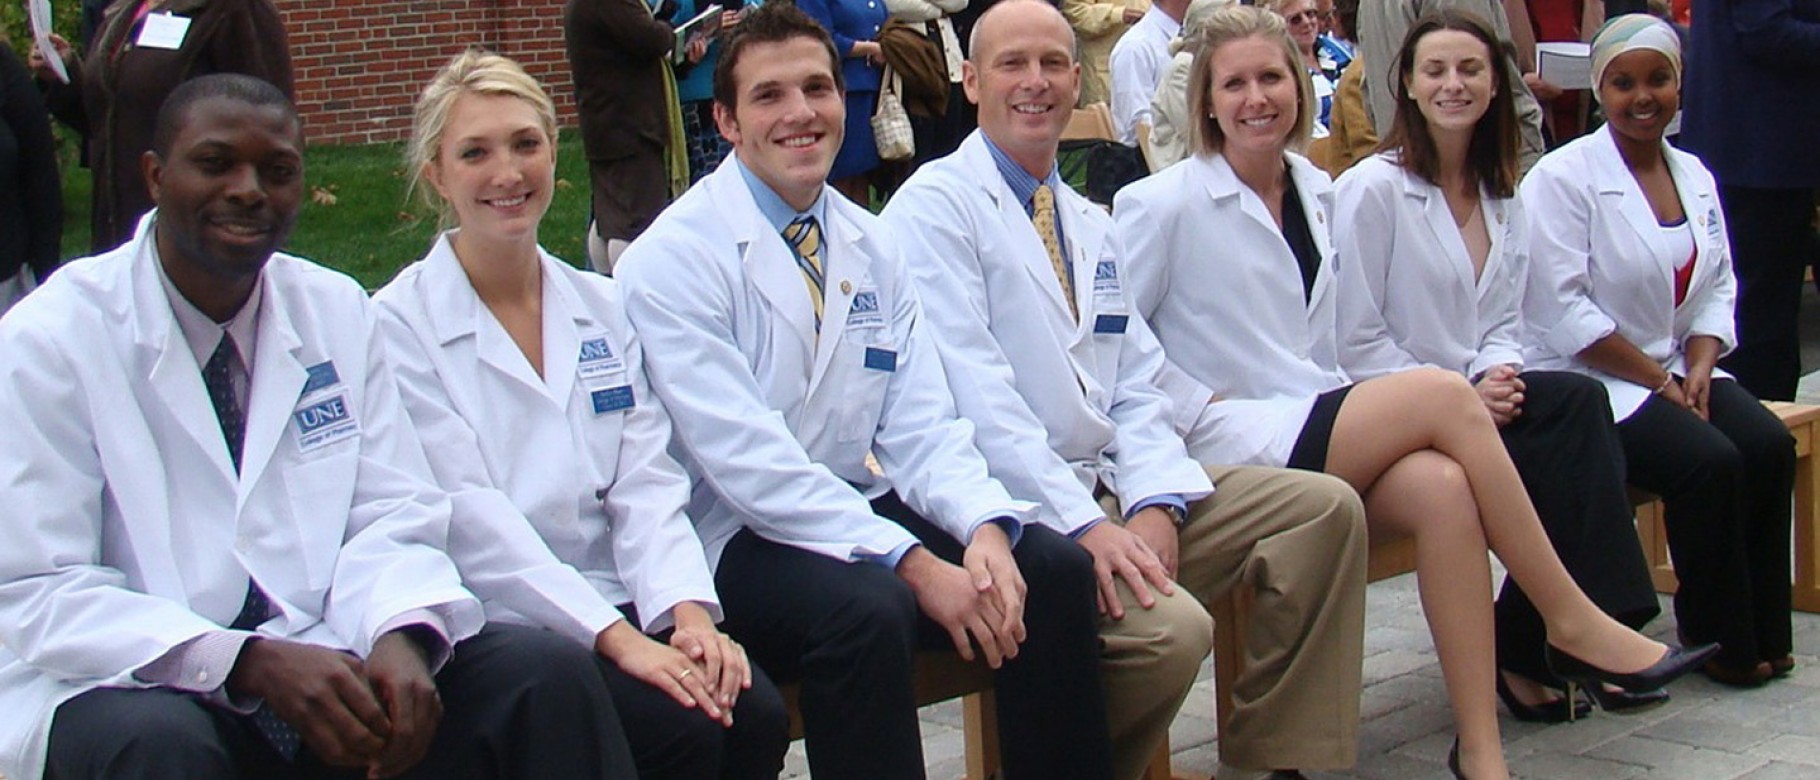 Students from UNE's inaugural class gather at the dedication ceremony for the Pharmacy building in October of 2009. On October 9